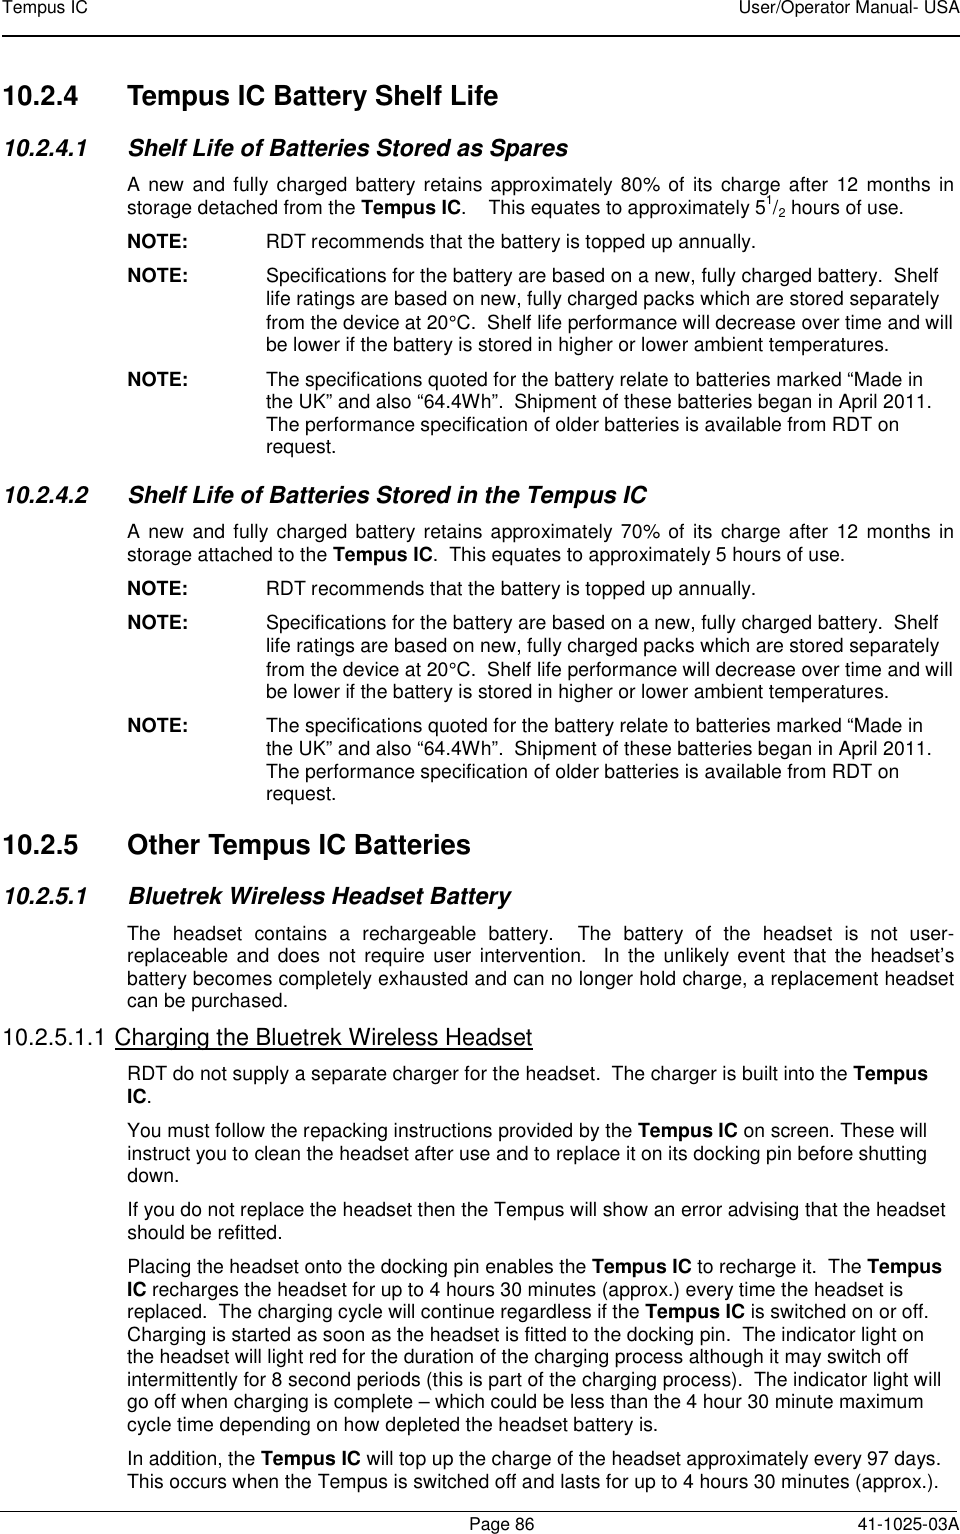 Tempus IC    User/Operator Manual- USA        Page 86   41-1025-03A 10.2.4  Tempus IC Battery Shelf Life 10.2.4.1  Shelf Life of Batteries Stored as Spares A new  and fully charged battery retains approximately 80% of its  charge  after  12 months in storage detached from the Tempus IC.    This equates to approximately 51/2 hours of use. NOTE:  RDT recommends that the battery is topped up annually. NOTE:  Specifications for the battery are based on a new, fully charged battery.  Shelf life ratings are based on new, fully charged packs which are stored separately from the device at 20°C.  Shelf life performance will decrease over time and will be lower if the battery is stored in higher or lower ambient temperatures. NOTE:  The specifications quoted for the battery relate to batteries marked “Made in the UK” and also “64.4Wh”.  Shipment of these batteries began in April 2011.  The performance specification of older batteries is available from RDT on request. 10.2.4.2  Shelf Life of Batteries Stored in the Tempus IC A new  and fully charged battery retains approximately 70% of its  charge  after  12 months in storage attached to the Tempus IC.  This equates to approximately 5 hours of use. NOTE:  RDT recommends that the battery is topped up annually. NOTE:  Specifications for the battery are based on a new, fully charged battery.  Shelf life ratings are based on new, fully charged packs which are stored separately from the device at 20°C.  Shelf life performance will decrease over time and will be lower if the battery is stored in higher or lower ambient temperatures. NOTE:  The specifications quoted for the battery relate to batteries marked “Made in the UK” and also “64.4Wh”.  Shipment of these batteries began in April 2011.  The performance specification of older batteries is available from RDT on request. 10.2.5  Other Tempus IC Batteries  10.2.5.1  Bluetrek Wireless Headset Battery The  headset  contains  a  rechargeable  battery.    The  battery  of  the  headset  is  not  user-replaceable  and does not  require user intervention.    In the unlikely  event that  the  headset’s battery becomes completely exhausted and can no longer hold charge, a replacement headset can be purchased. 10.2.5.1.1 Charging the Bluetrek Wireless Headset RDT do not supply a separate charger for the headset.  The charger is built into the Tempus IC. You must follow the repacking instructions provided by the Tempus IC on screen. These will instruct you to clean the headset after use and to replace it on its docking pin before shutting down. If you do not replace the headset then the Tempus will show an error advising that the headset should be refitted. Placing the headset onto the docking pin enables the Tempus IC to recharge it.  The Tempus IC recharges the headset for up to 4 hours 30 minutes (approx.) every time the headset is replaced.  The charging cycle will continue regardless if the Tempus IC is switched on or off.  Charging is started as soon as the headset is fitted to the docking pin.  The indicator light on the headset will light red for the duration of the charging process although it may switch off intermittently for 8 second periods (this is part of the charging process).  The indicator light will go off when charging is complete – which could be less than the 4 hour 30 minute maximum cycle time depending on how depleted the headset battery is. In addition, the Tempus IC will top up the charge of the headset approximately every 97 days.  This occurs when the Tempus is switched off and lasts for up to 4 hours 30 minutes (approx.).   